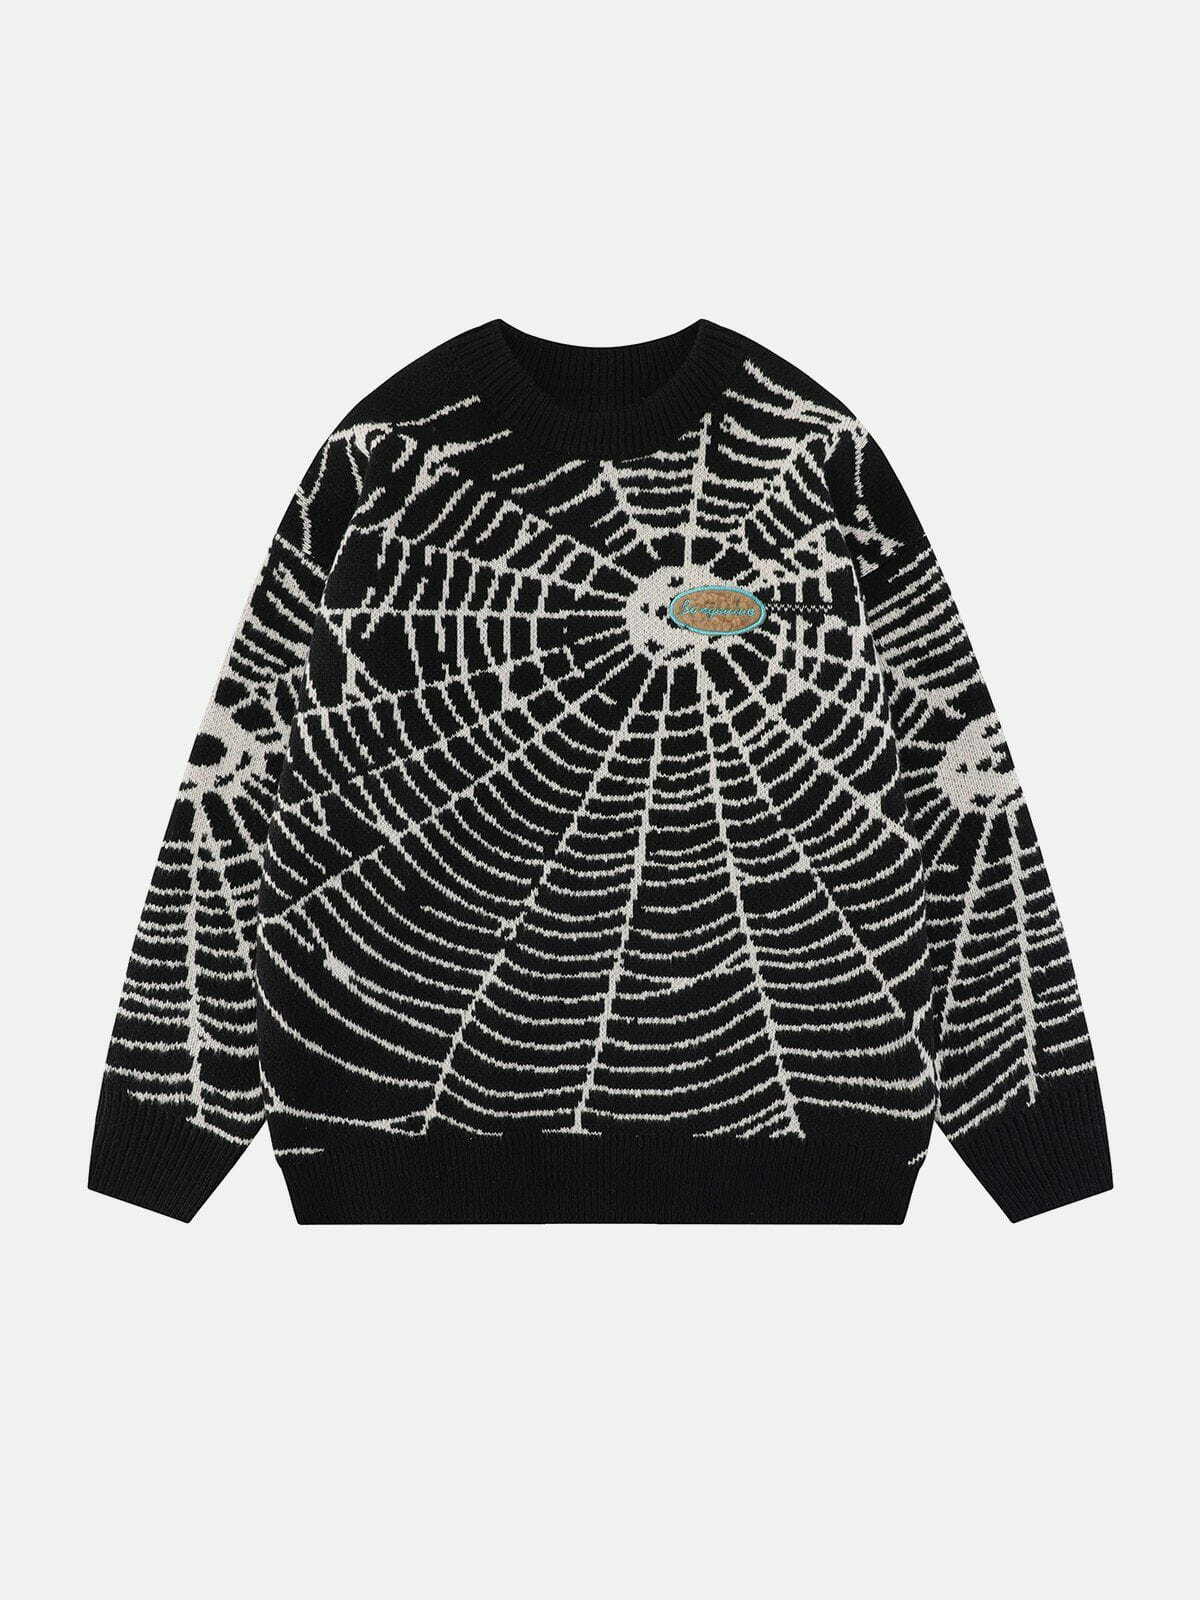 knit spider web sweater edgy streetwear chic 7936